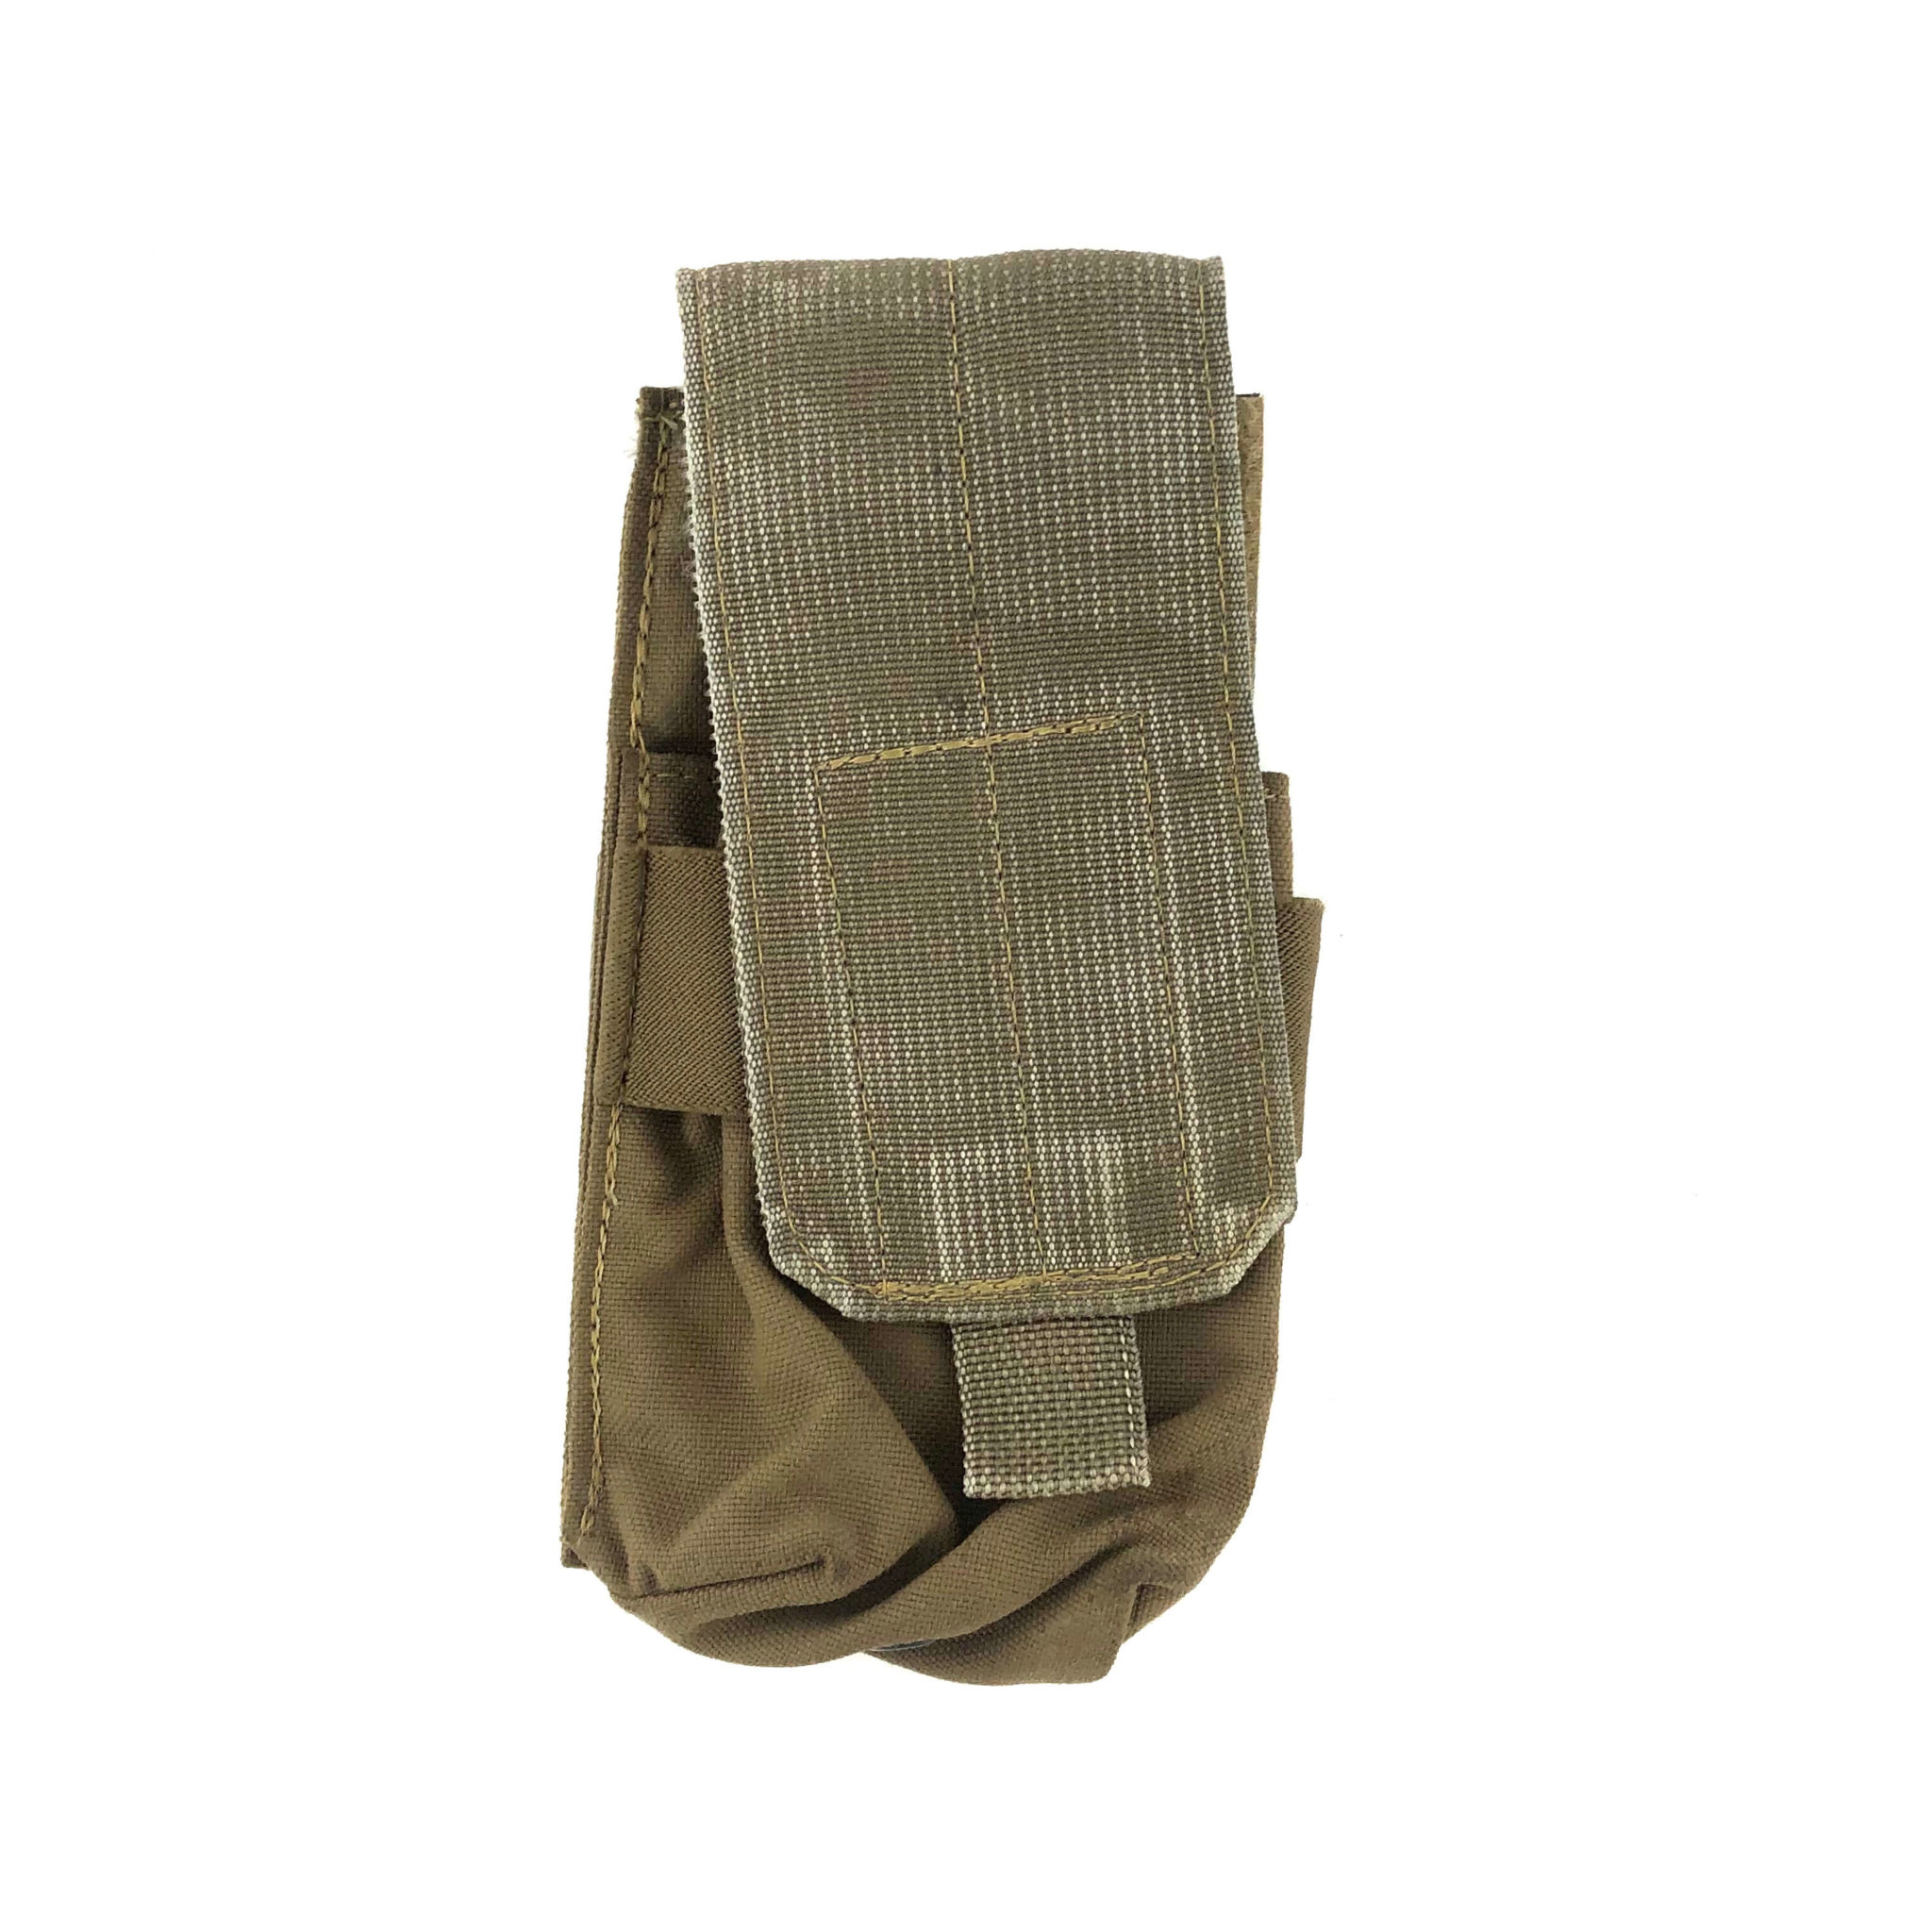 FIRE FORCE Double Mag Pouch USMC COYOTE BROWN MARPAT FAIR/FUNCTIONAL